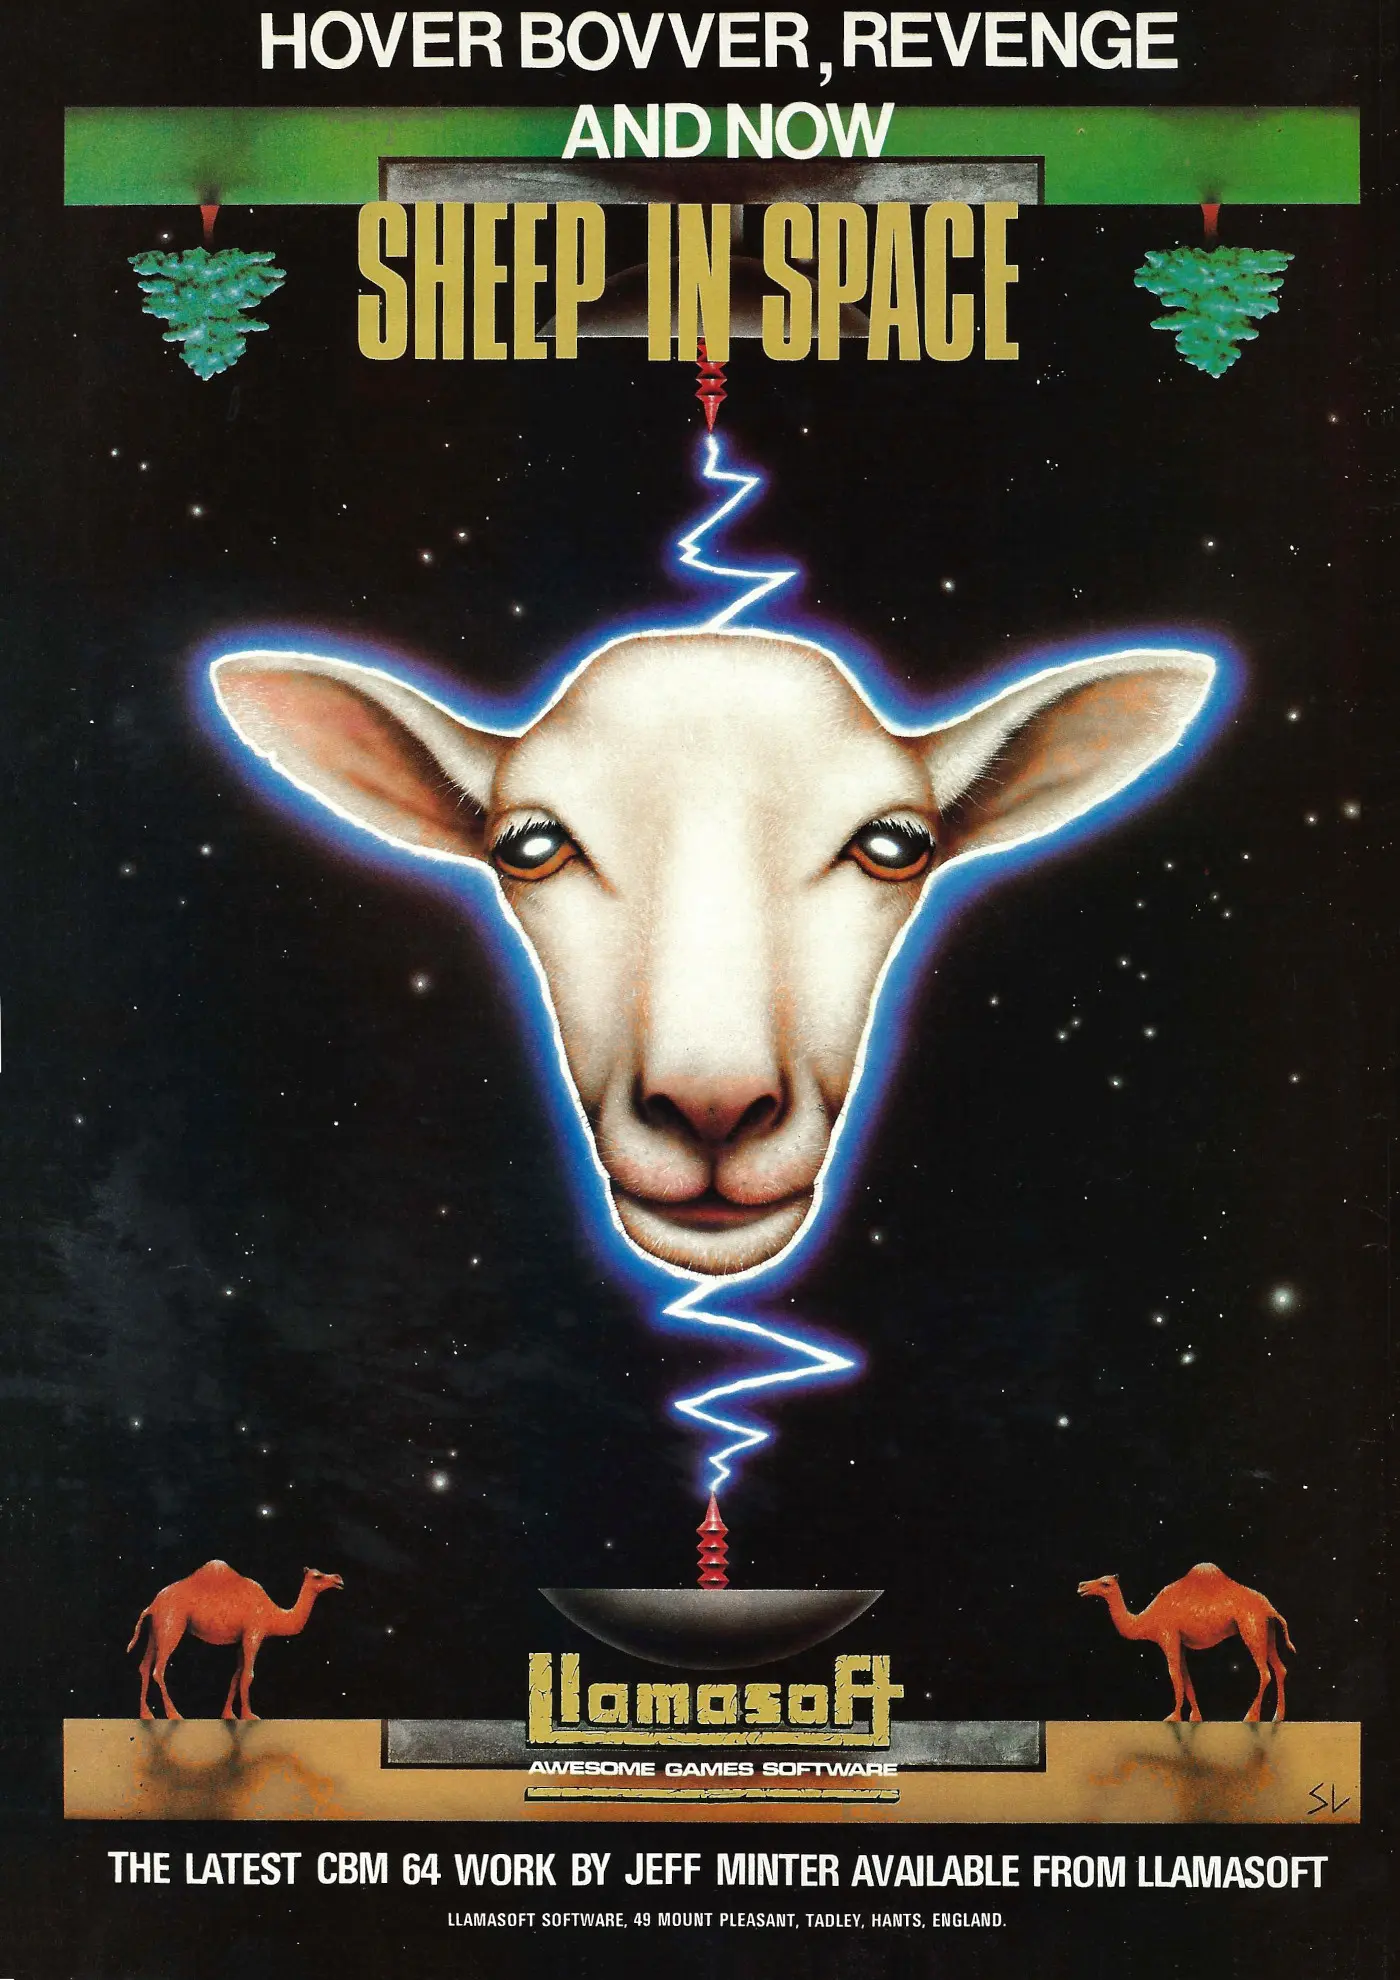 A Llamasoft advert for Minter's Sheep in Space - another ruminant-themed game - on the Commodore 64, from before the switch to Atari. From Your Computer, July 1984